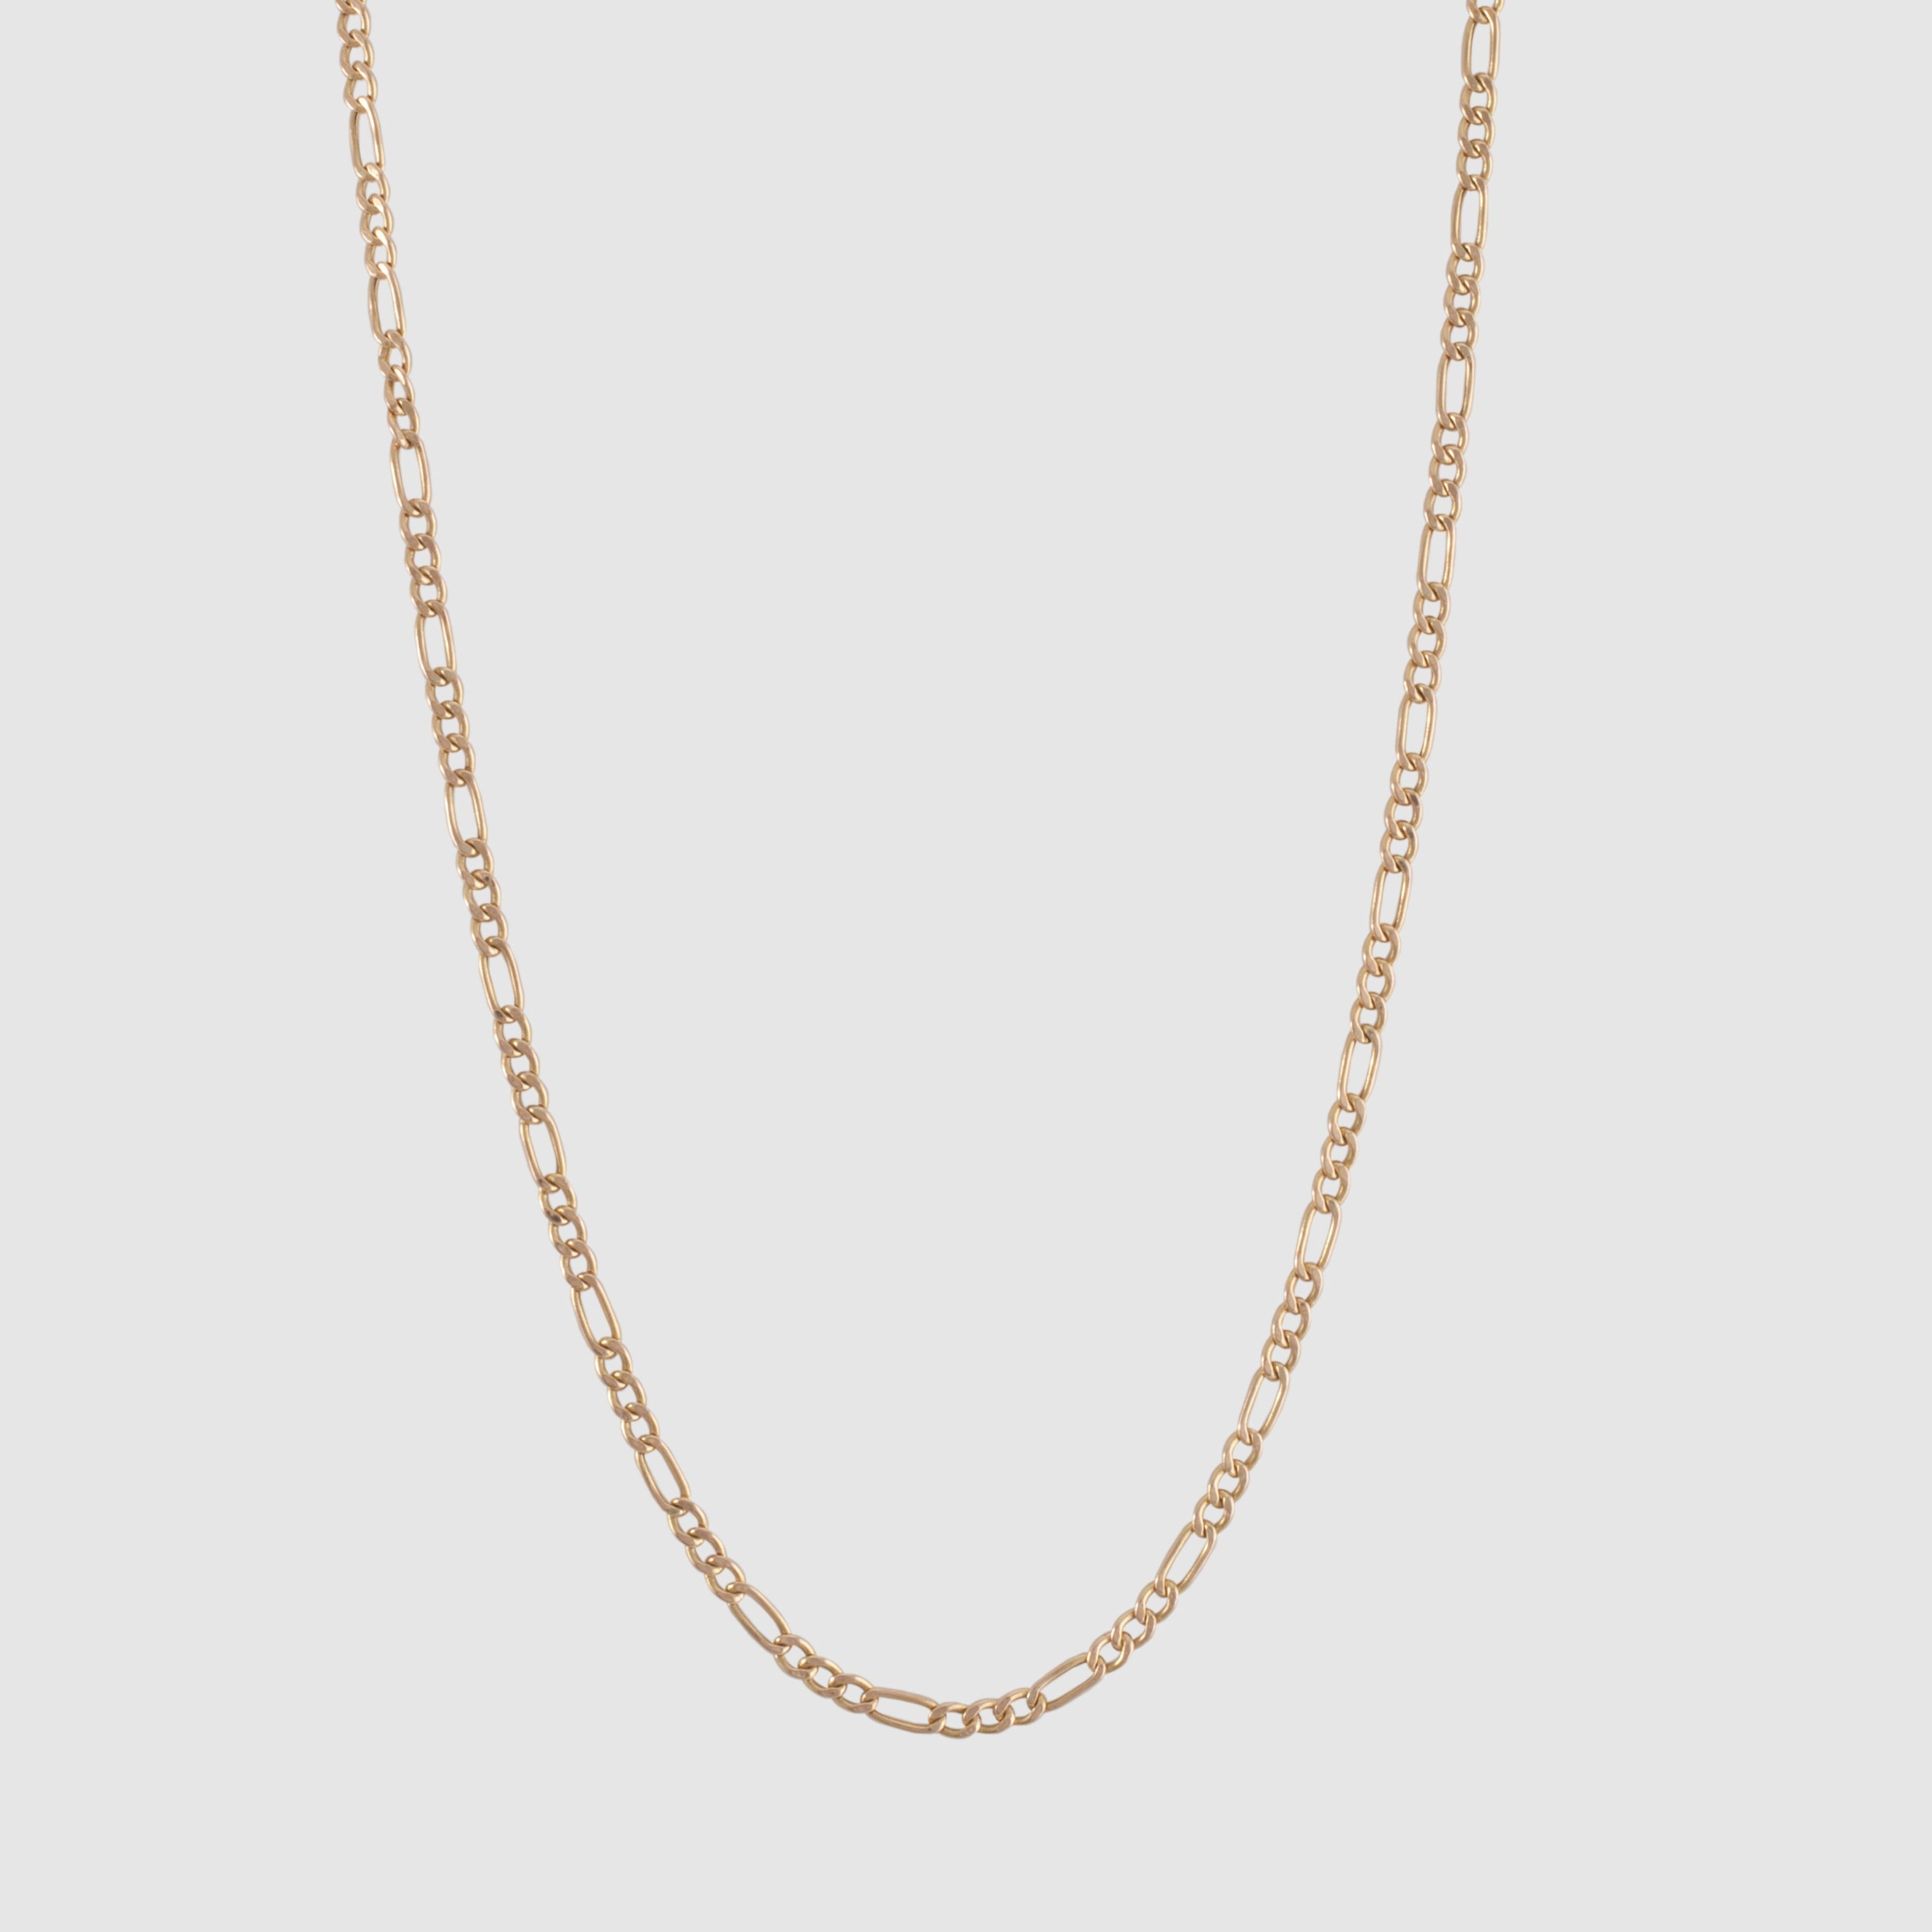 10k gold hollow figaro chain